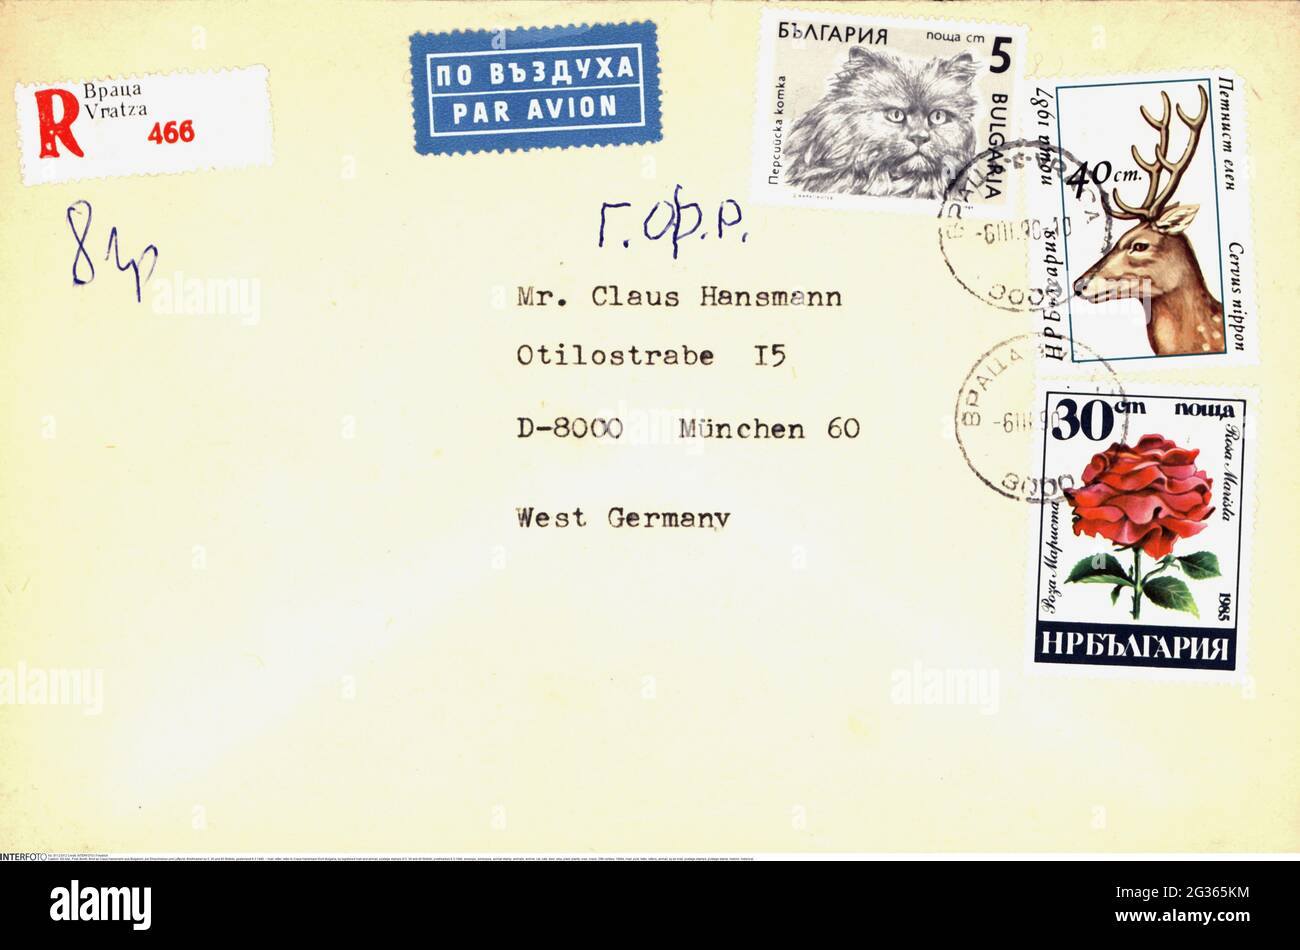 mail, letter, letter to Claus Hansmann from Bulgaria, by registered mail and airmail, ADDITIONAL-RIGHTS-CLEARANCE-INFO-NOT-AVAILABLE Stock Photo